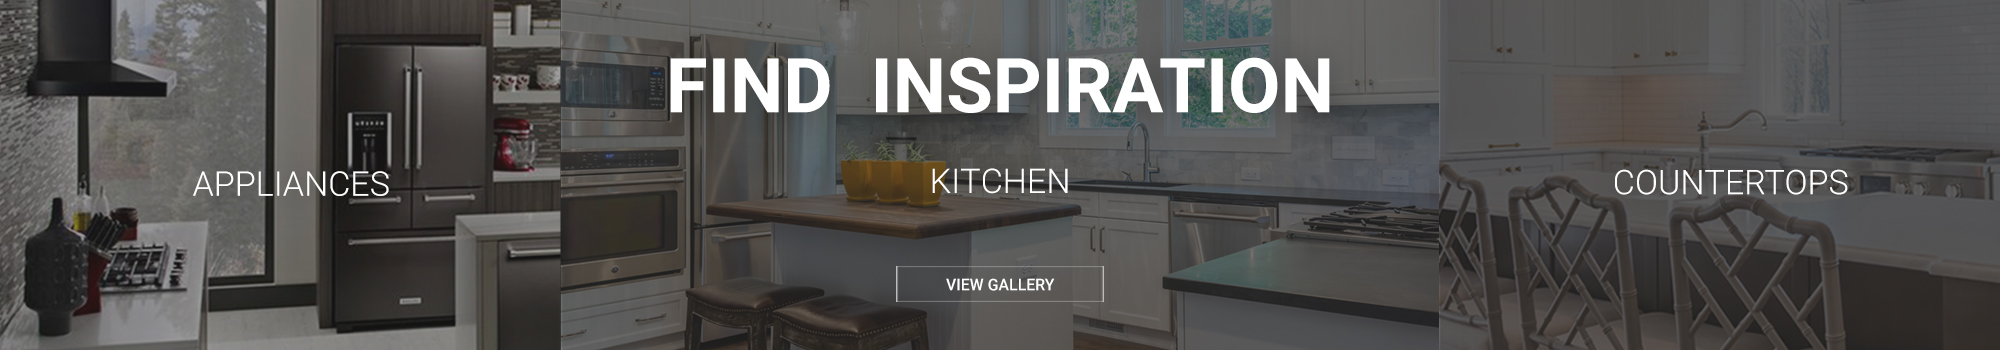 Find Inspiration - Appliances - Kitchen - Countertops - View Gallery